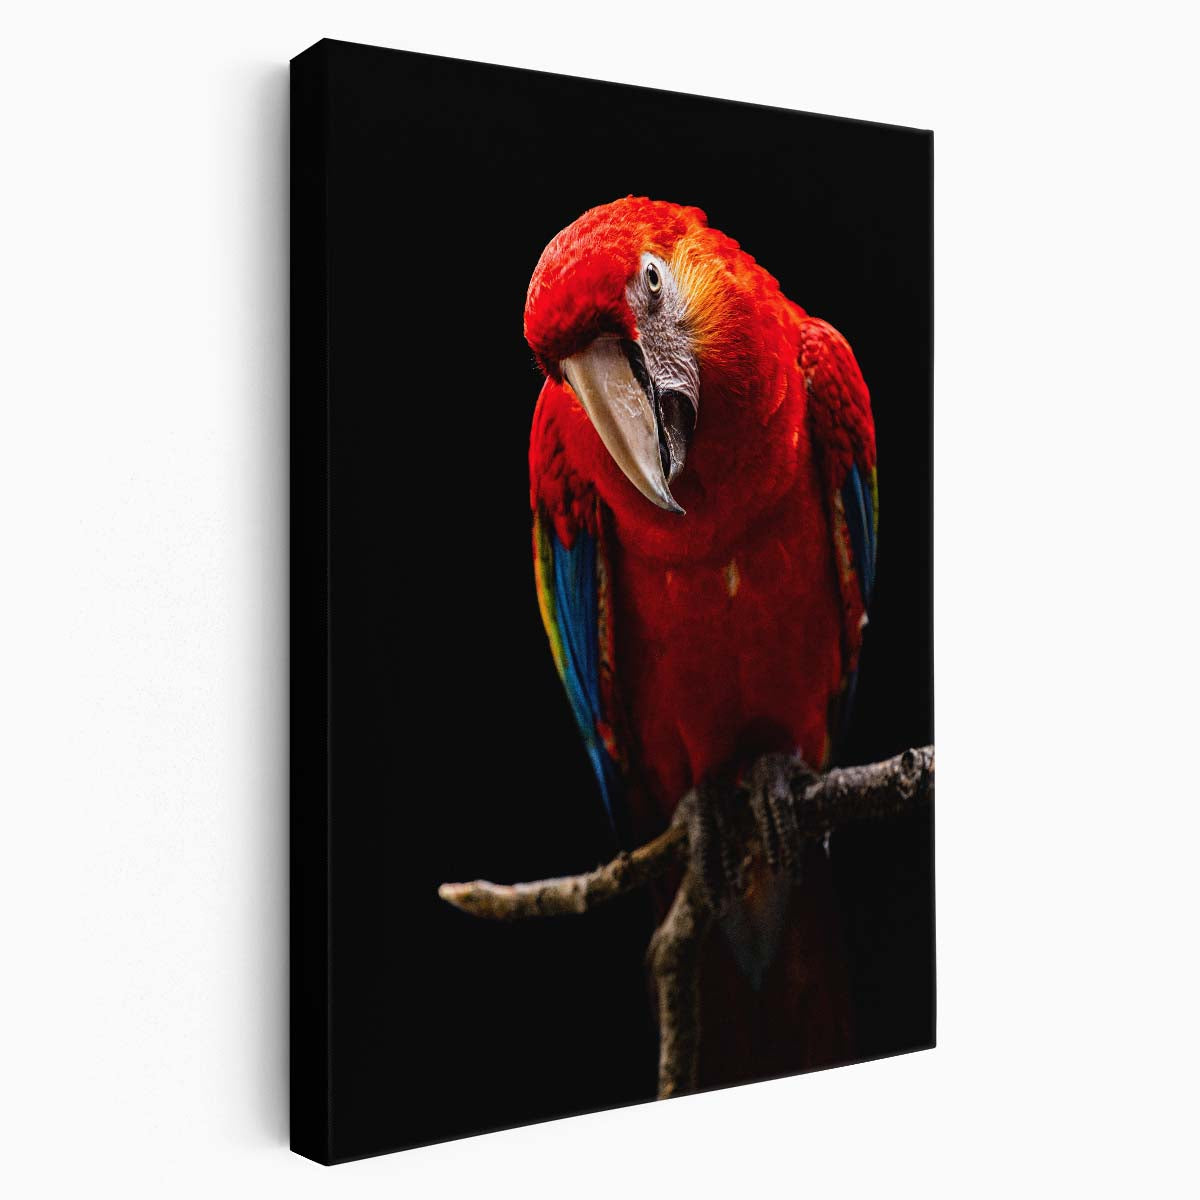 Colorful Scarlet Macaw Parrot Photography Wall Art, Dark Background by Luxuriance Designs, made in USA